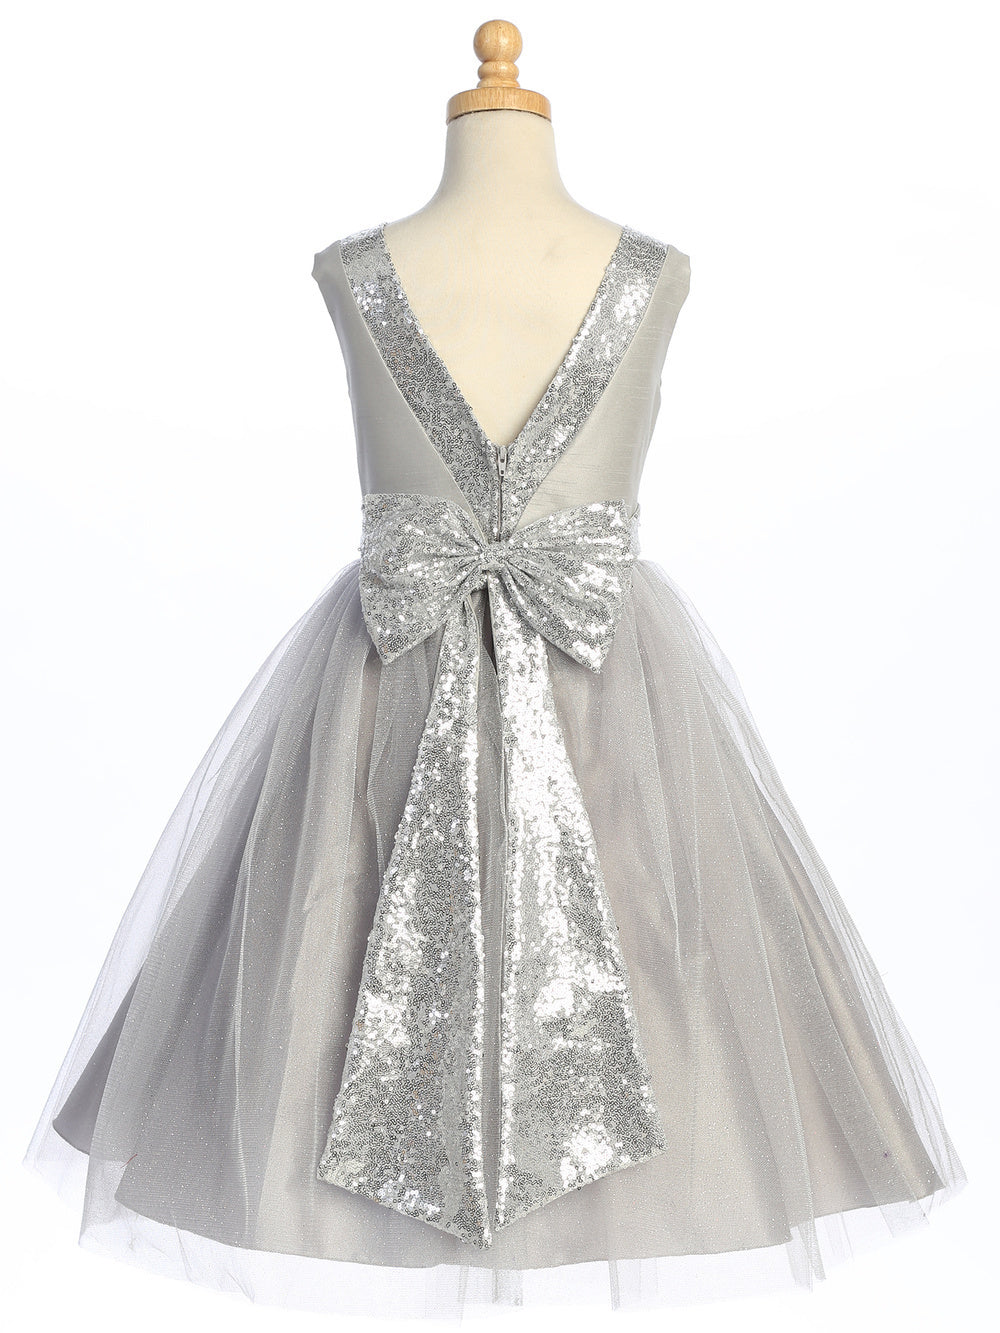 Enchanting in silver, flower girl adorned in shantung dress with sparkle tulle and sequins.